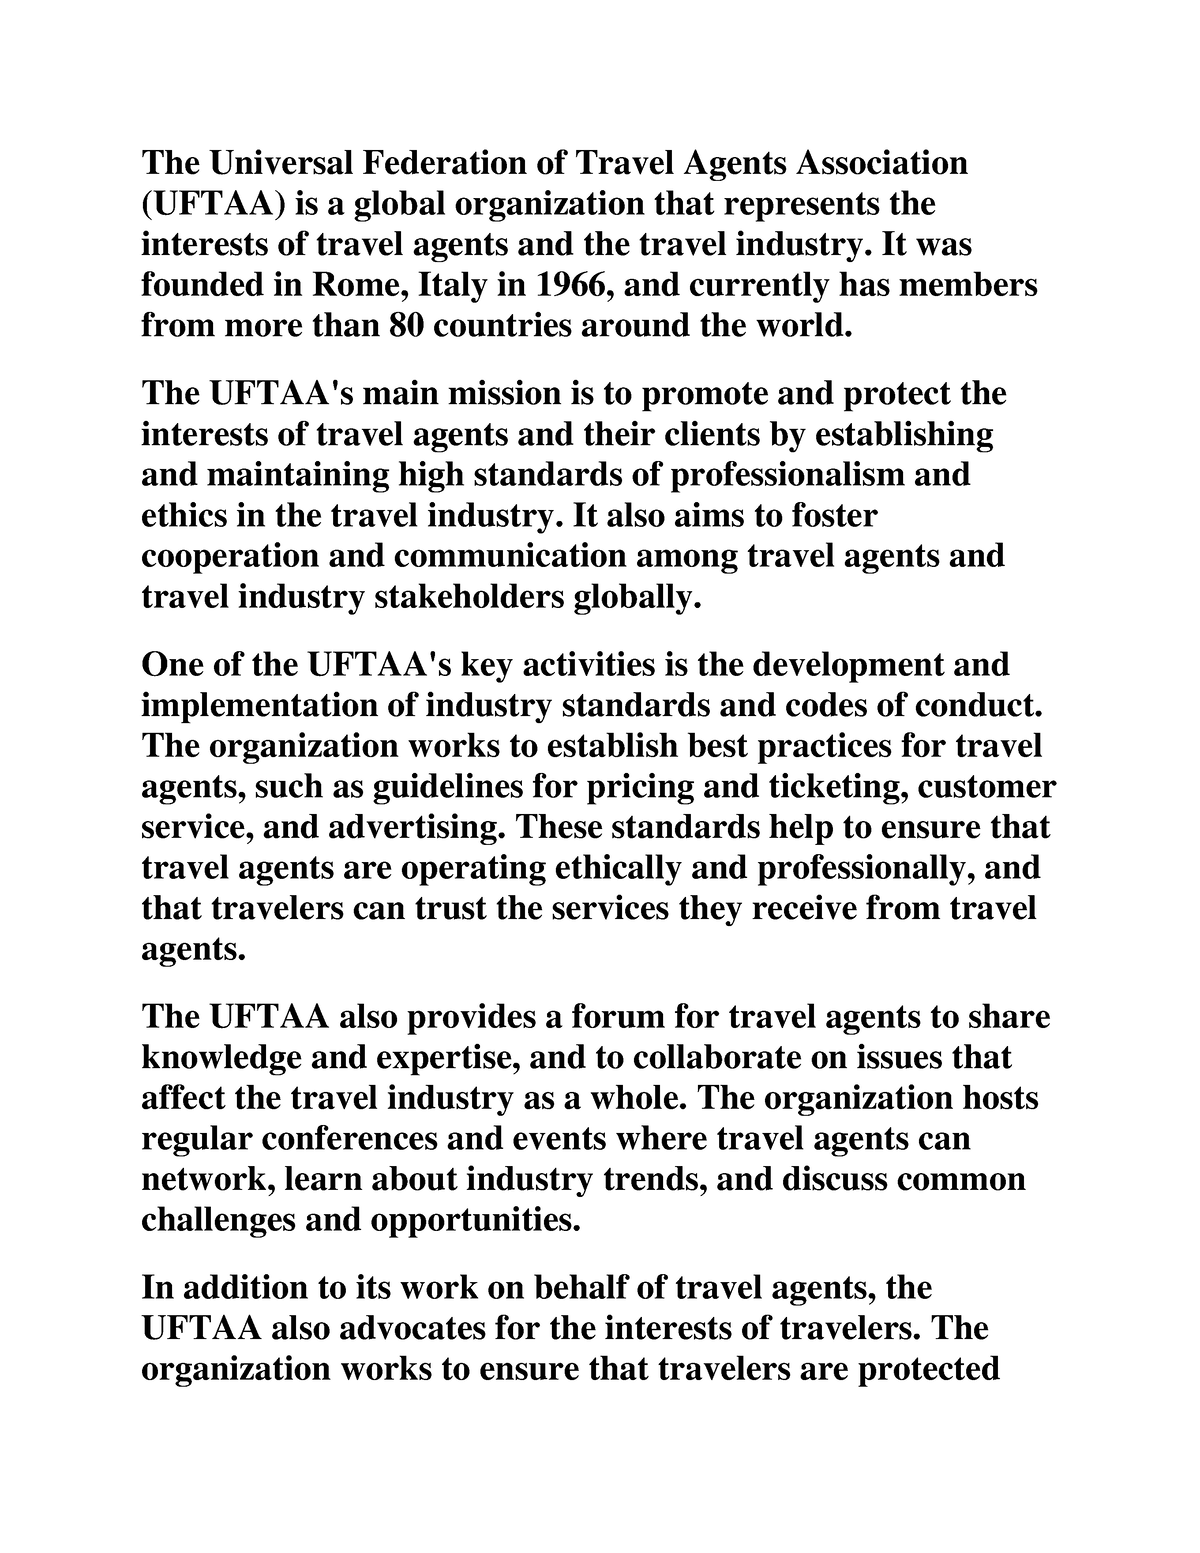 universal federation of travel agents associations